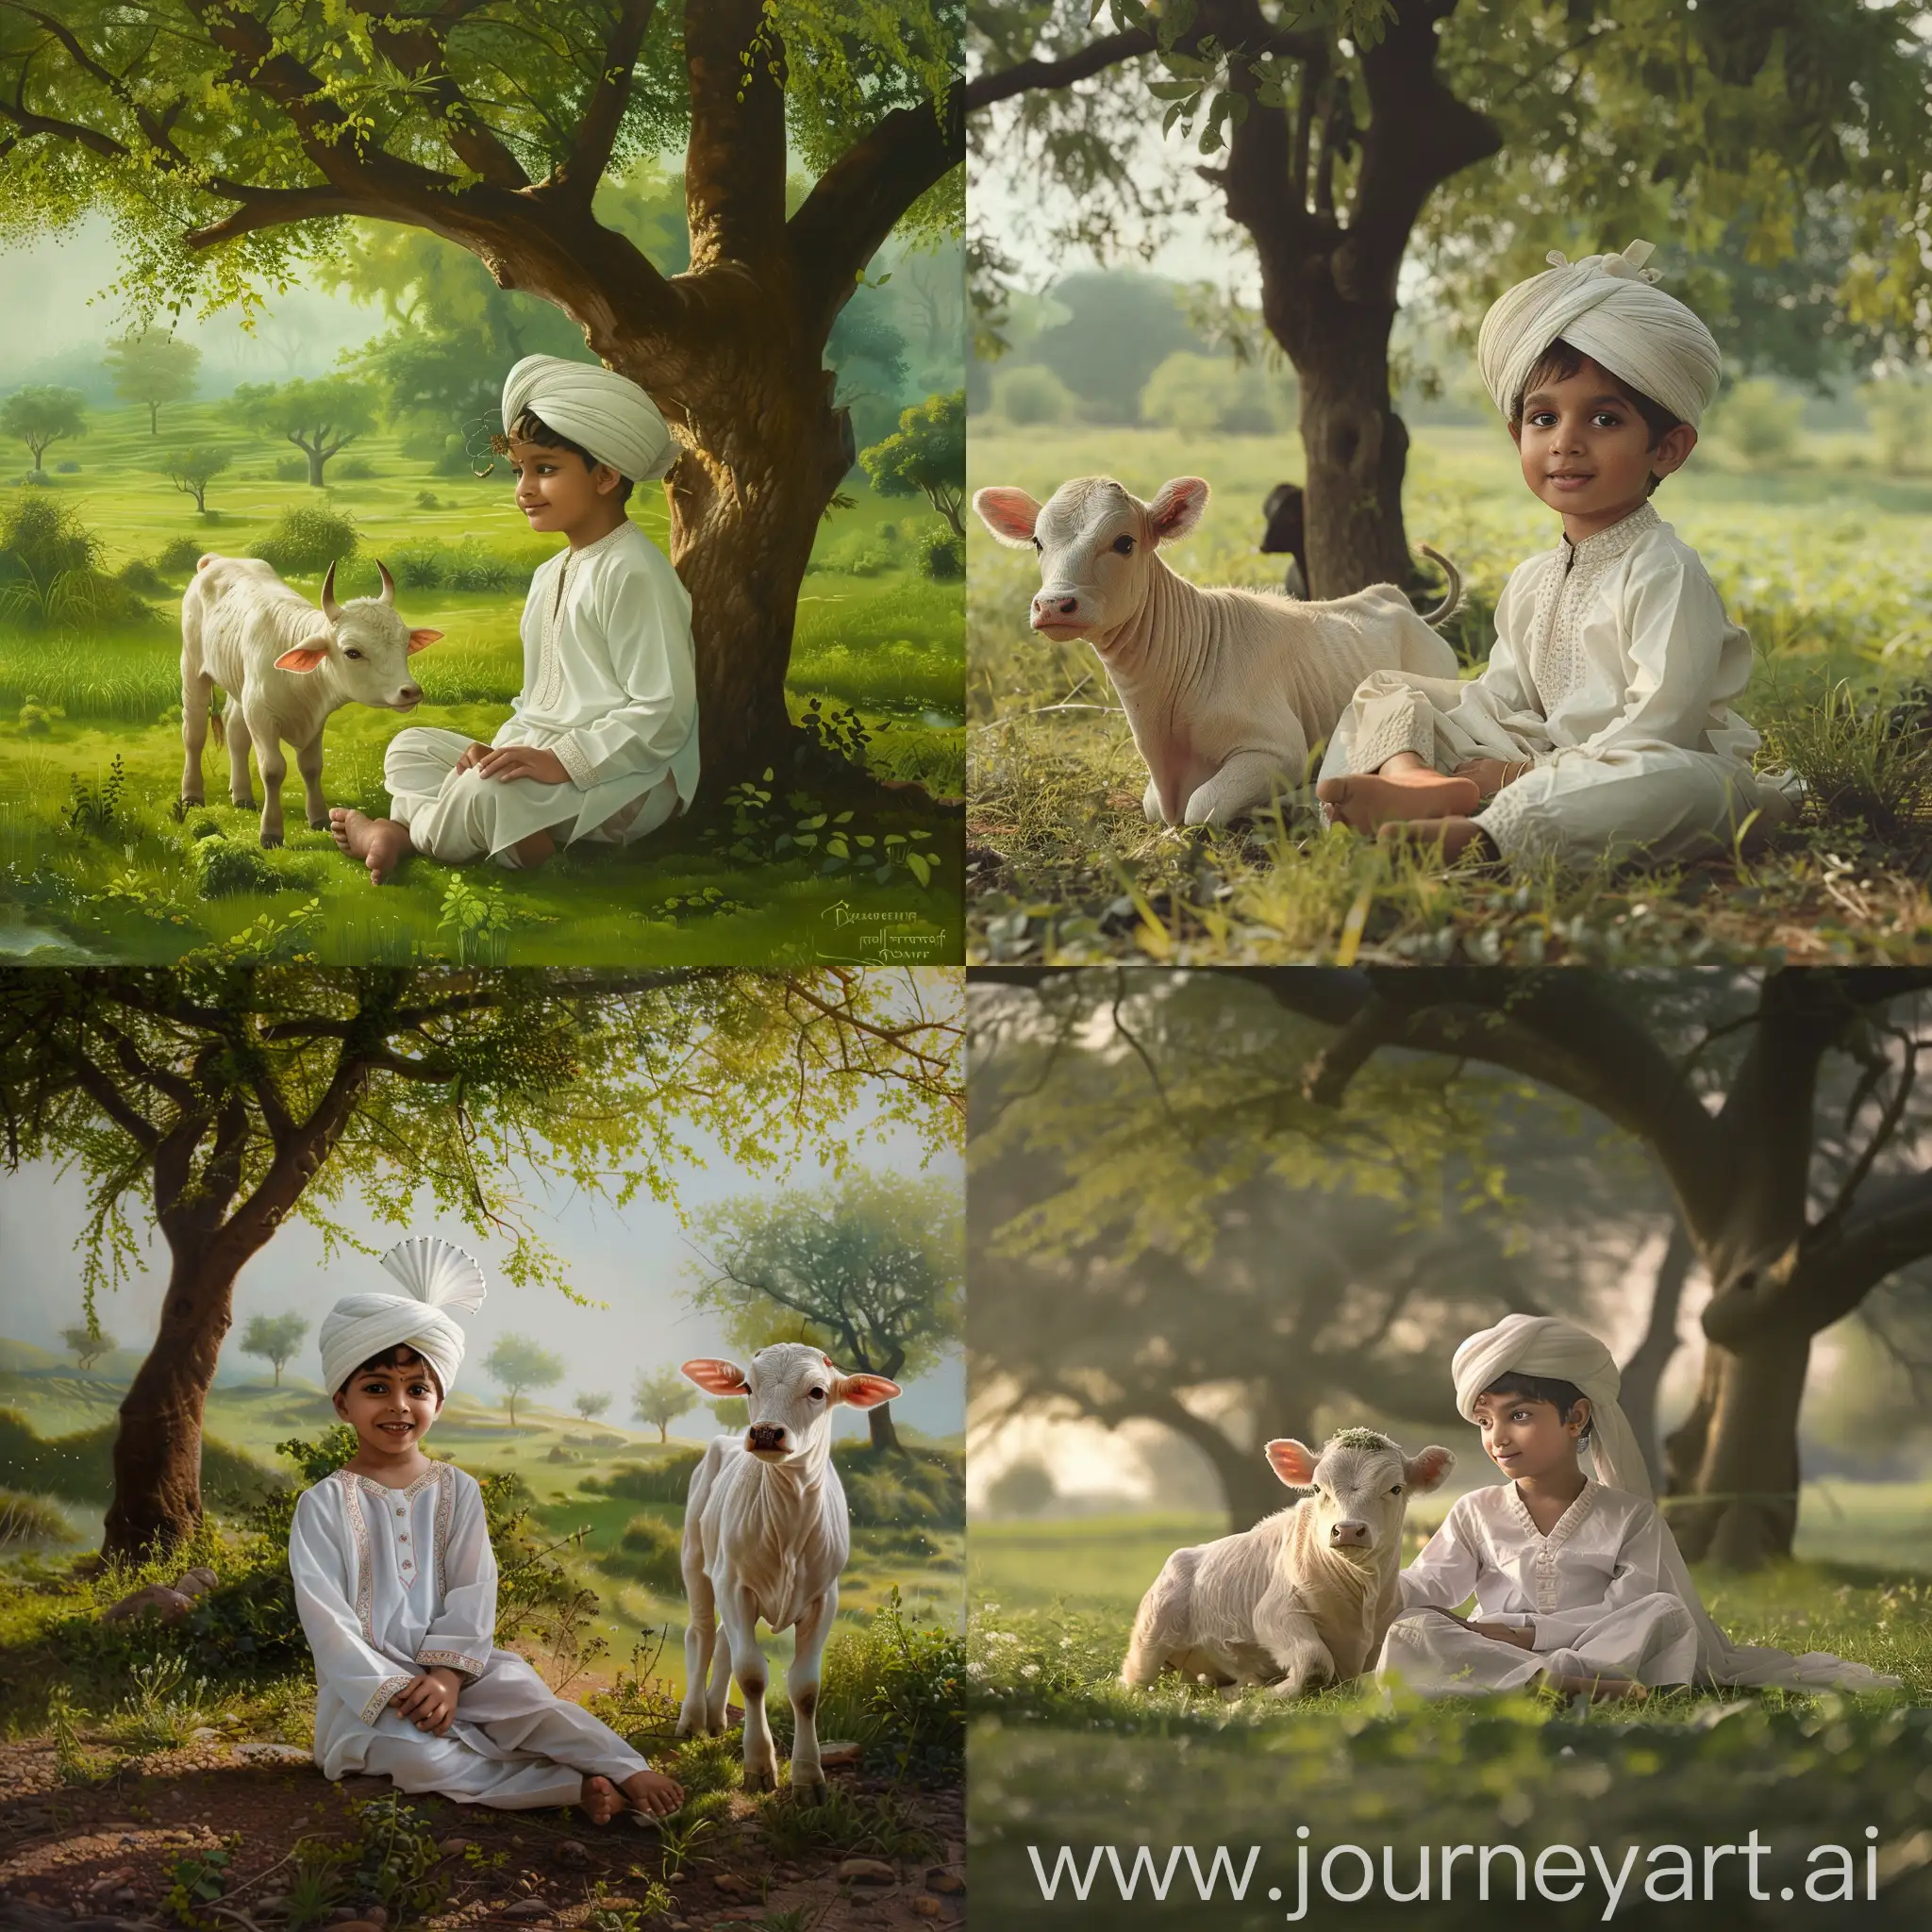 A village child wearing a white kurta panjama with white turban on head sitting near a cute white calf under a beautiful trees in a green field hyper realistic morning view